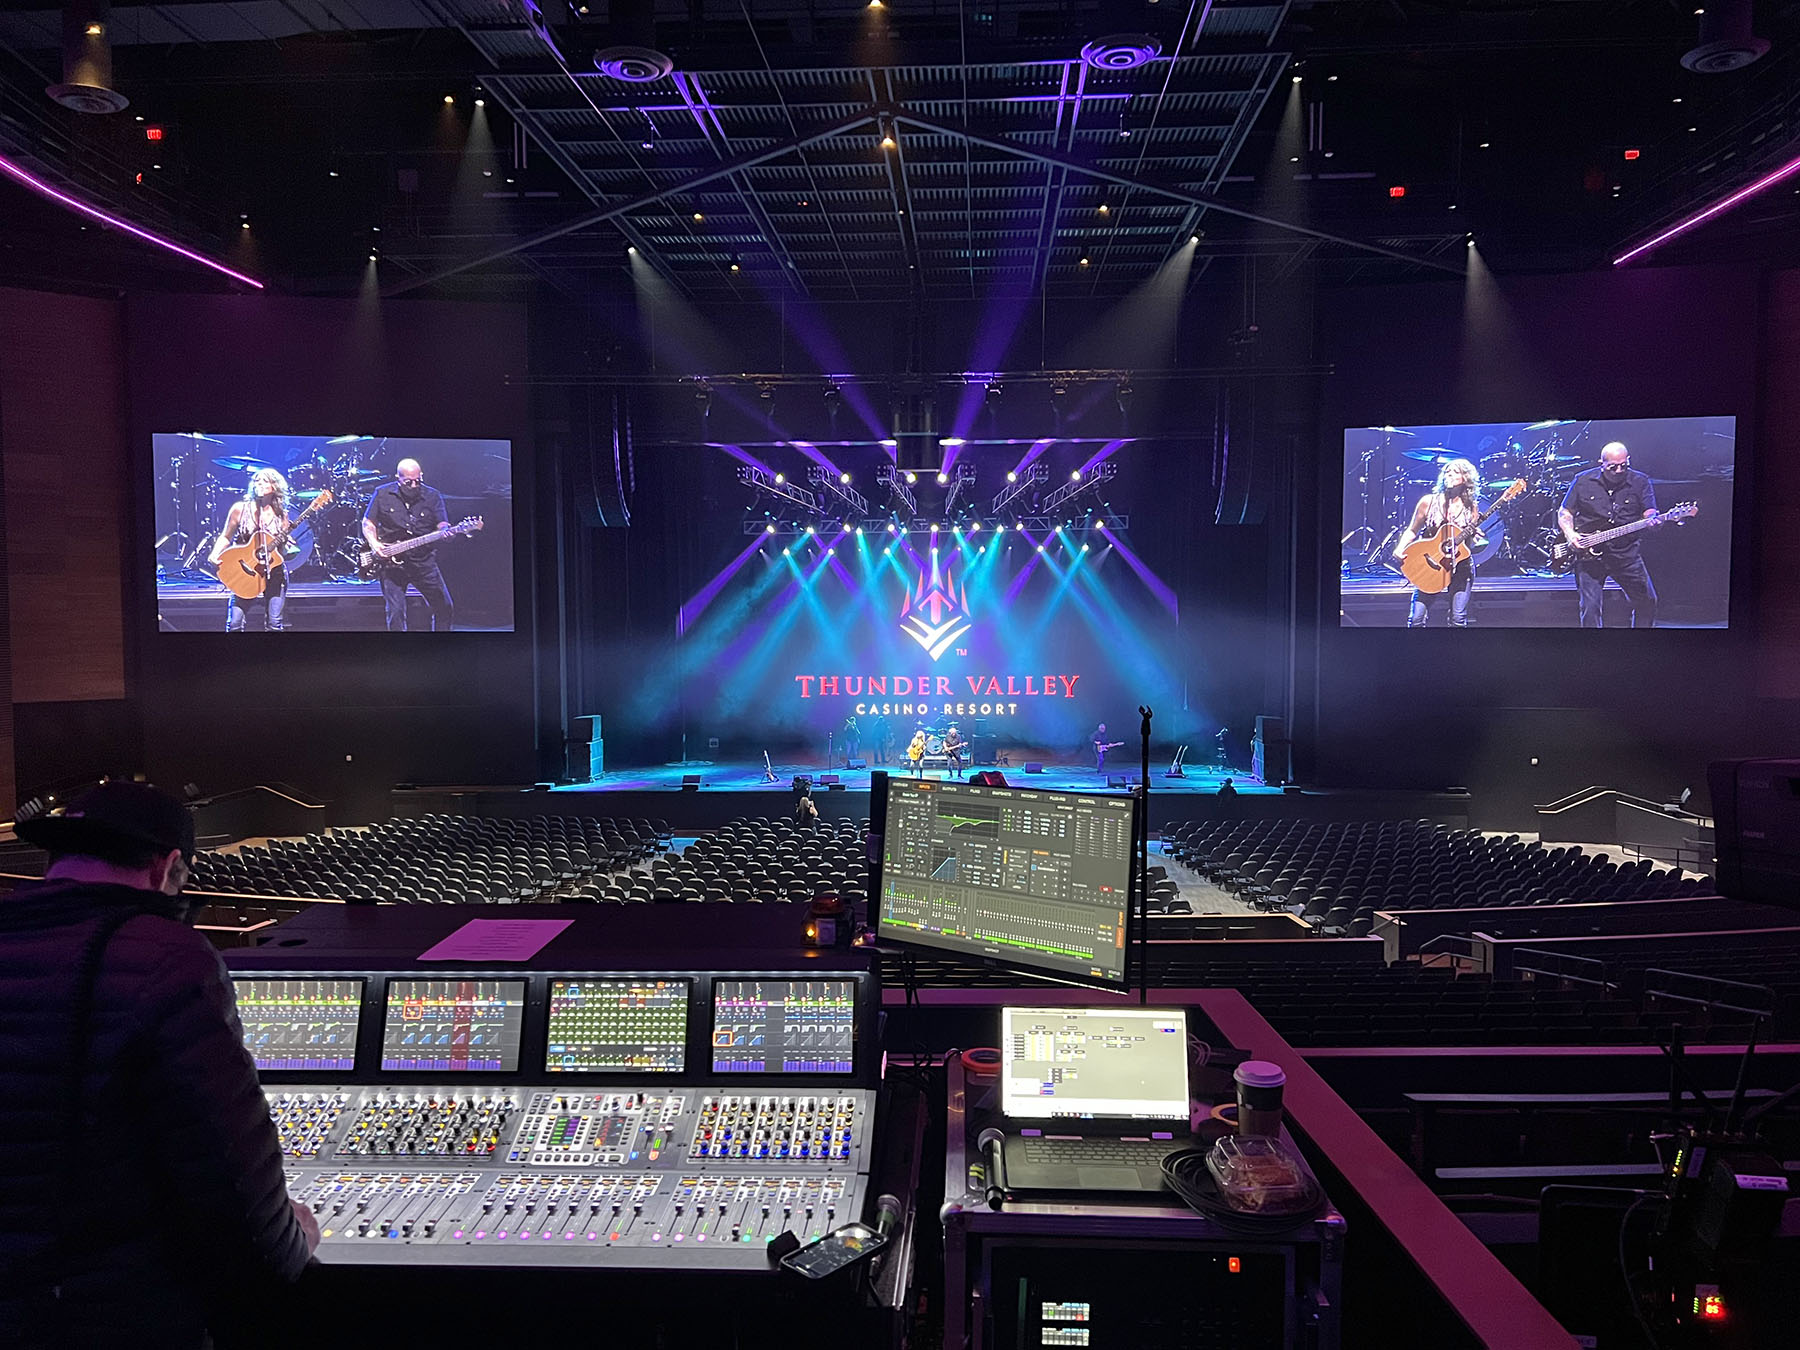 L-Acoustics, innovative sound systems, and technologies Strike Twice at Thunder Valley Casino Resort after 2011. The Venue at Thunder Valley Casino Resort is proving the value of its state-of-the-art L-Acoustics K2 sound system with its first run of shows.